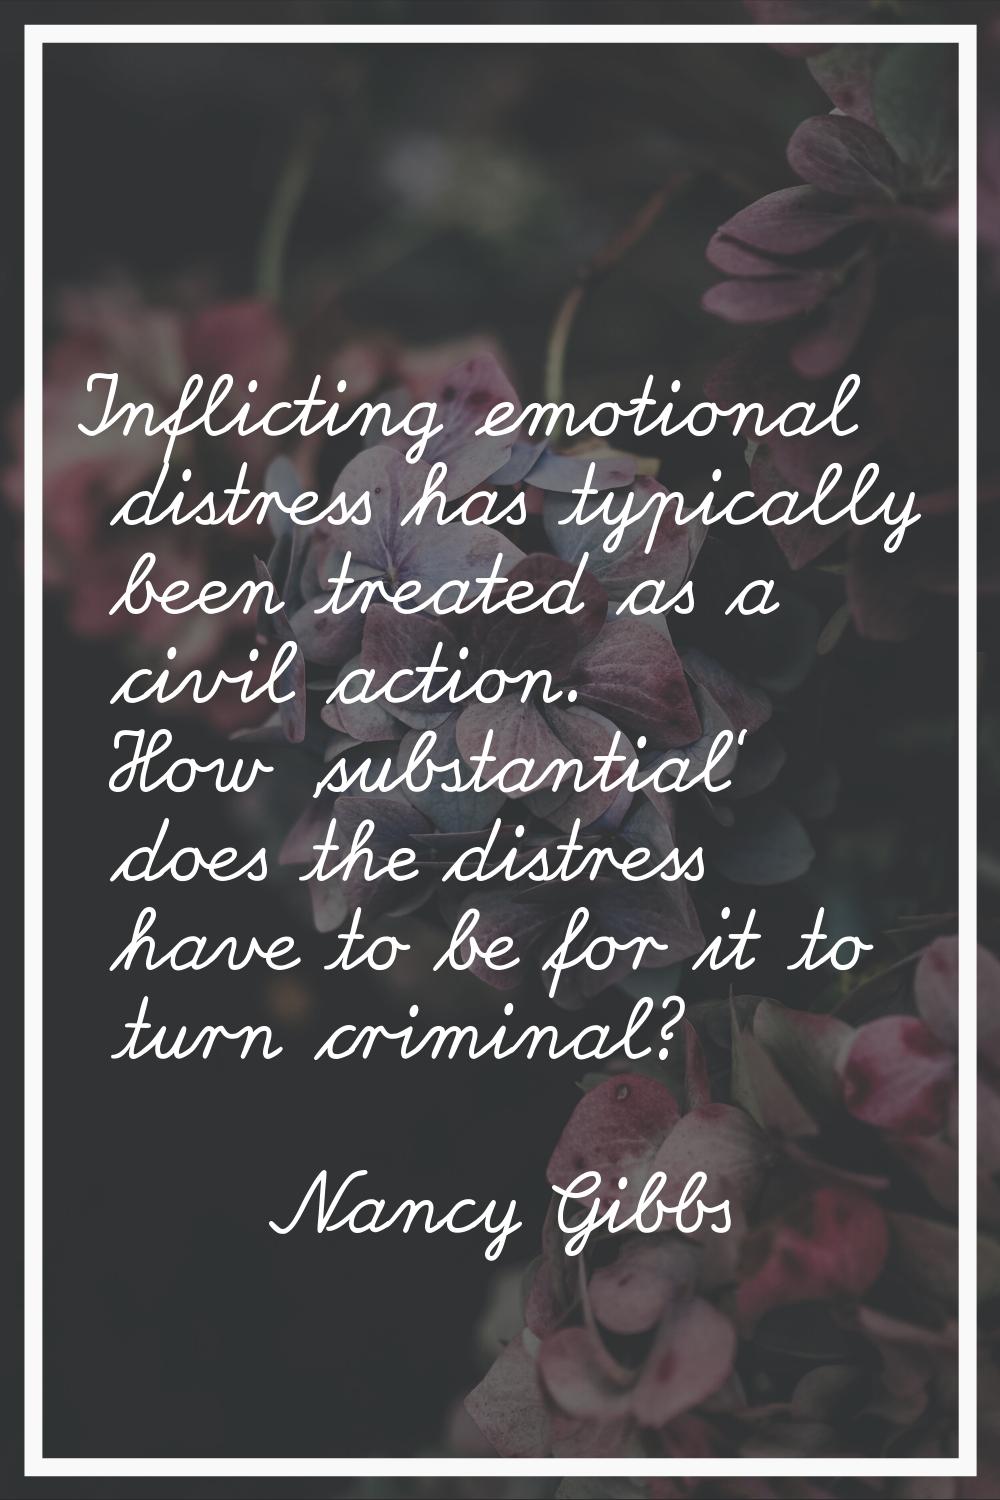 Inflicting emotional distress has typically been treated as a civil action. How 'substantial' does 